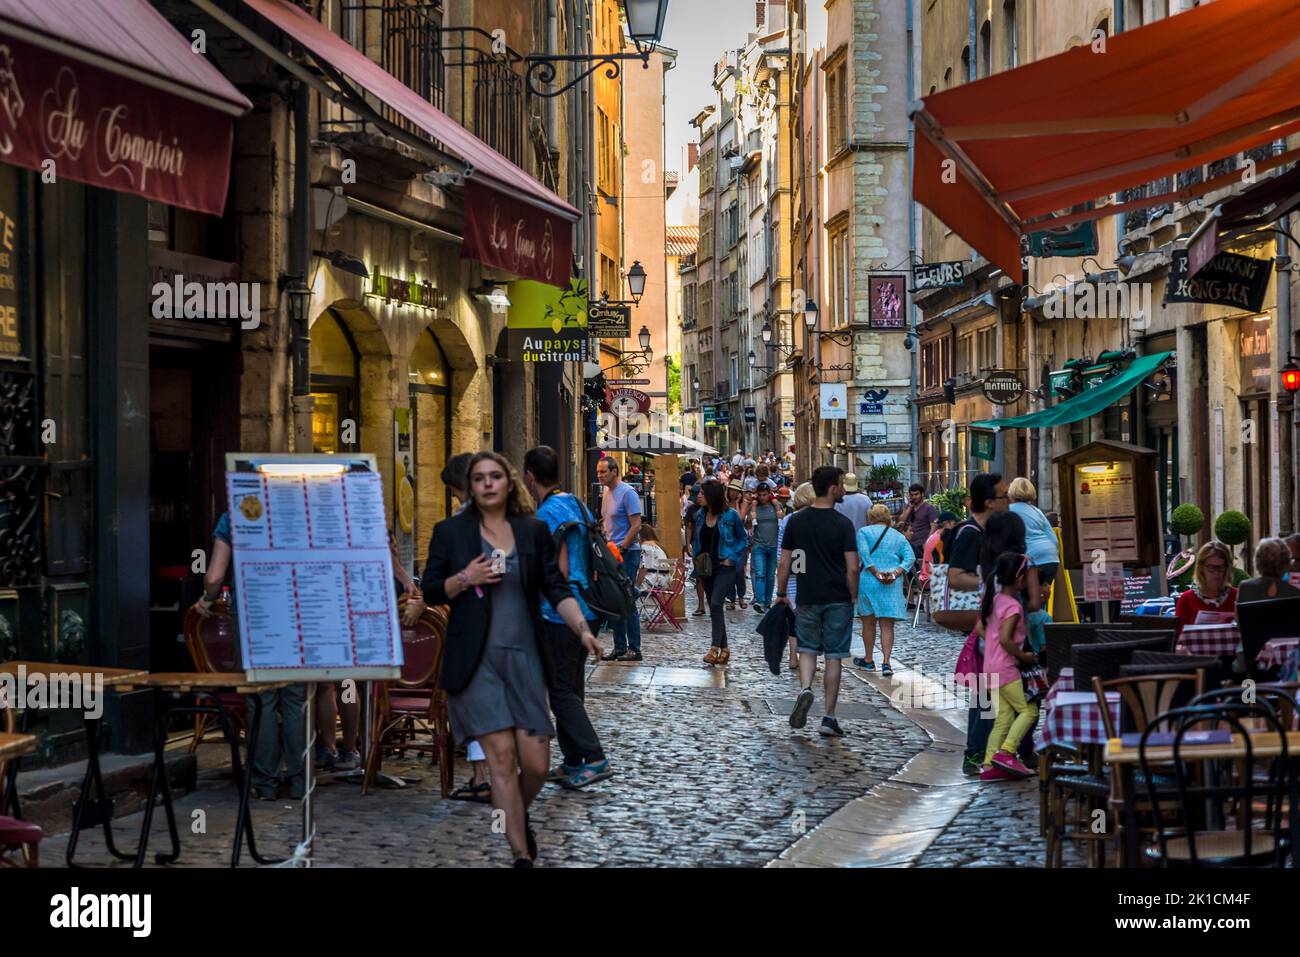 Busy atmospheric street in Vieux Lyon or Old Lyon, one of Europe’s most extensive Renaissance neighbourhoods, Lyon, France Stock Photo